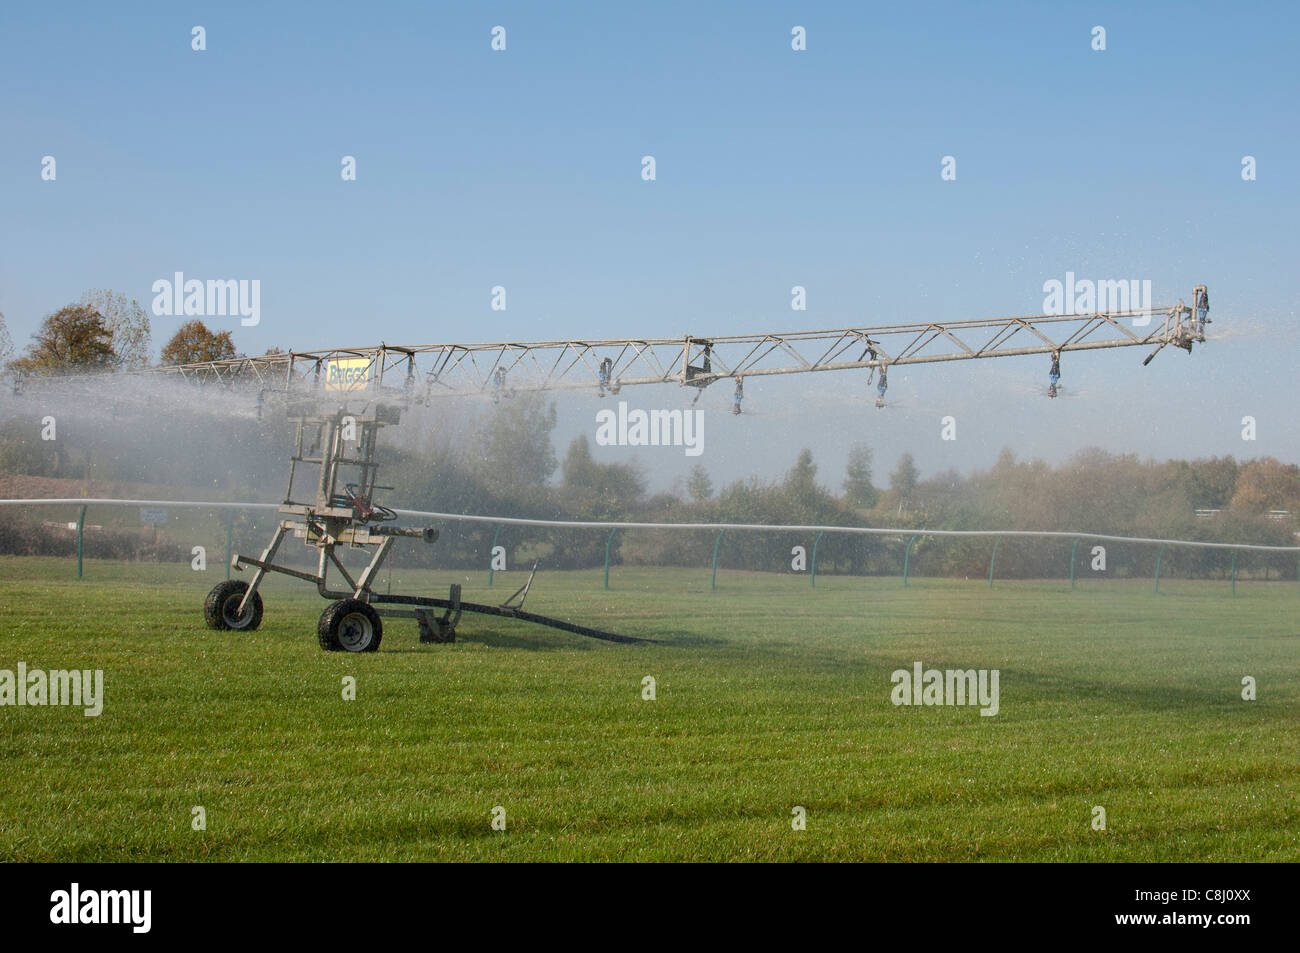 Briggs automatic watering system on Warwick racecourse, UK Stock Photo